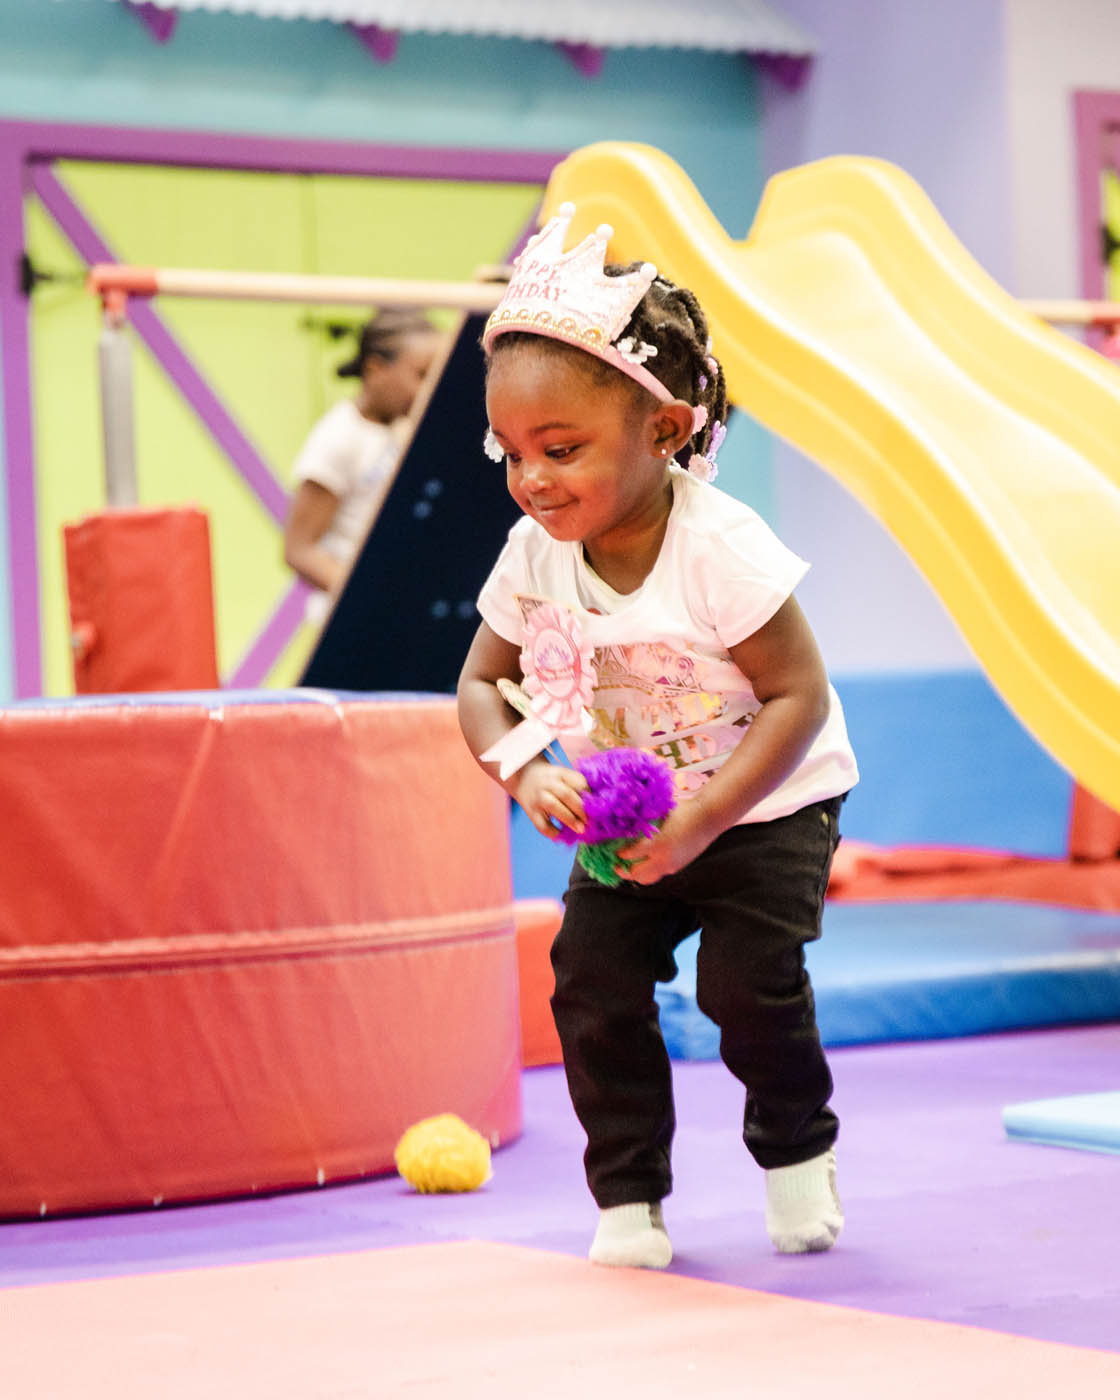 A little girl enjoying her b day party at Romp n' Roll Northwest Charlotte kids birthday party places.